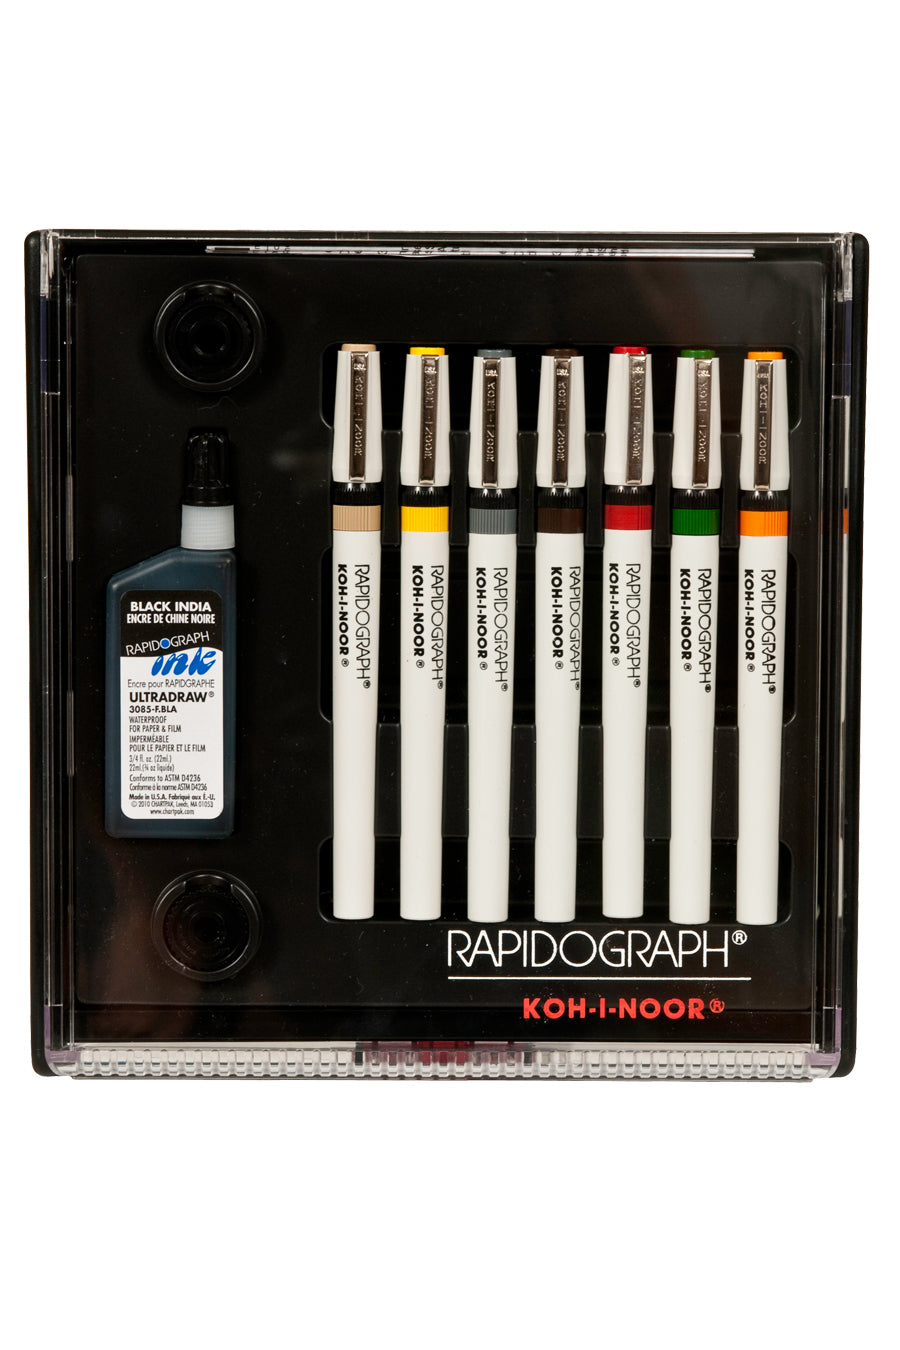 Koh-I-Noor® Rapidograph® Pen and Ink Sets